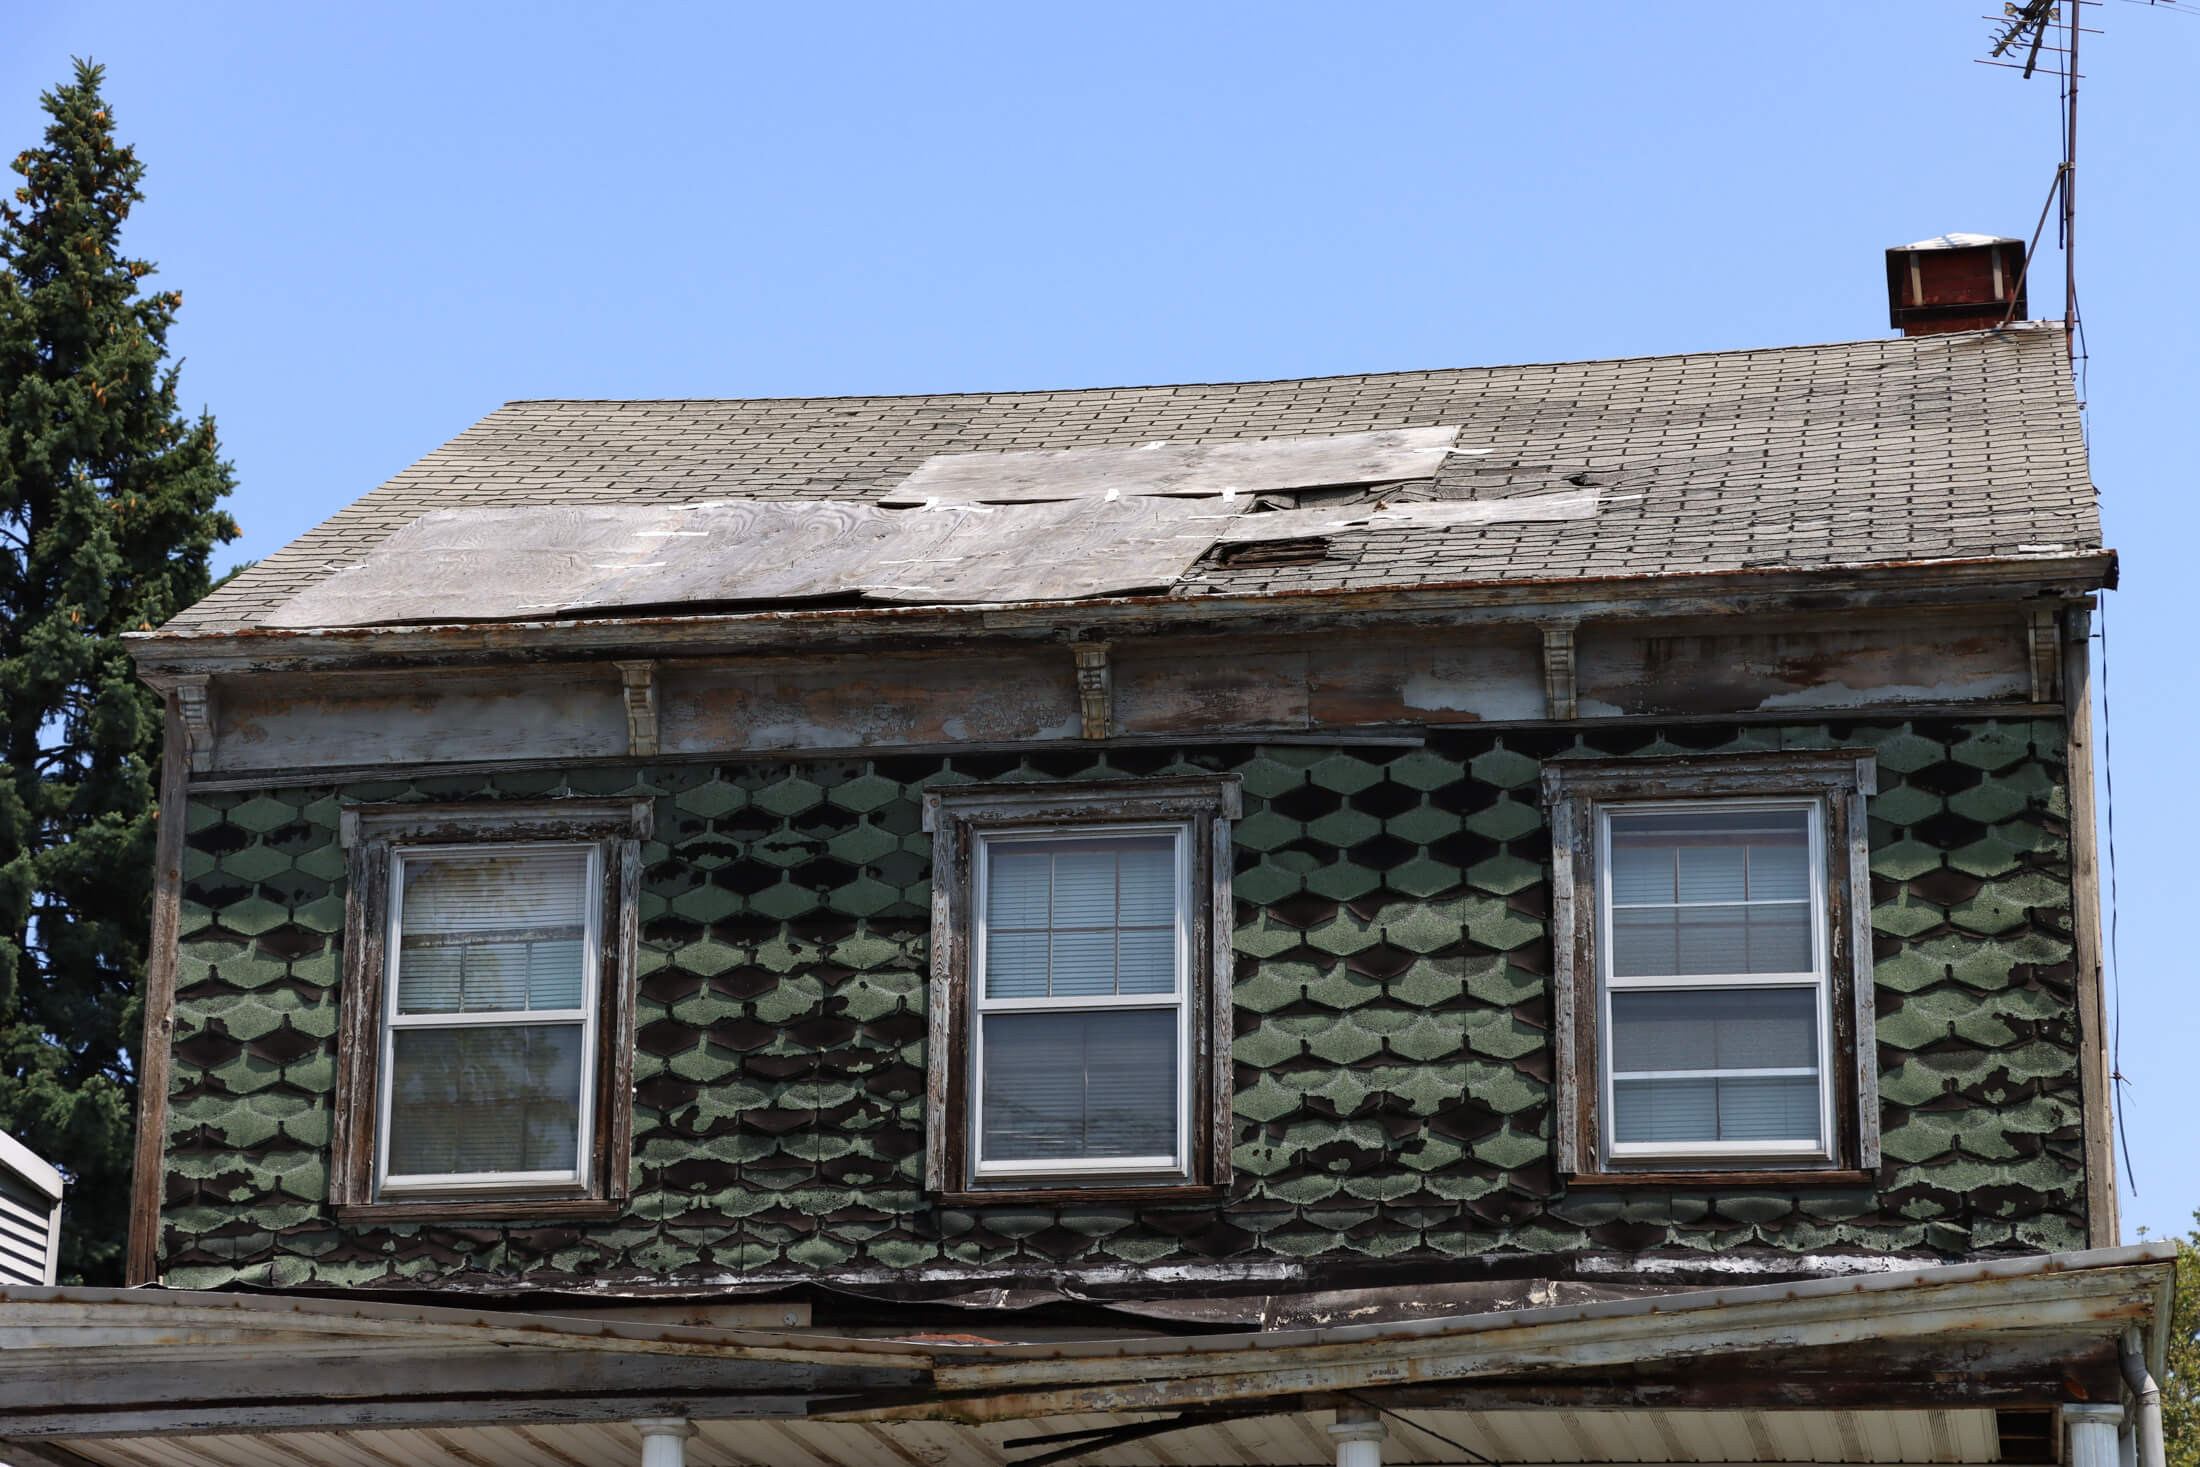 a view of the roof which shows some patching and holes